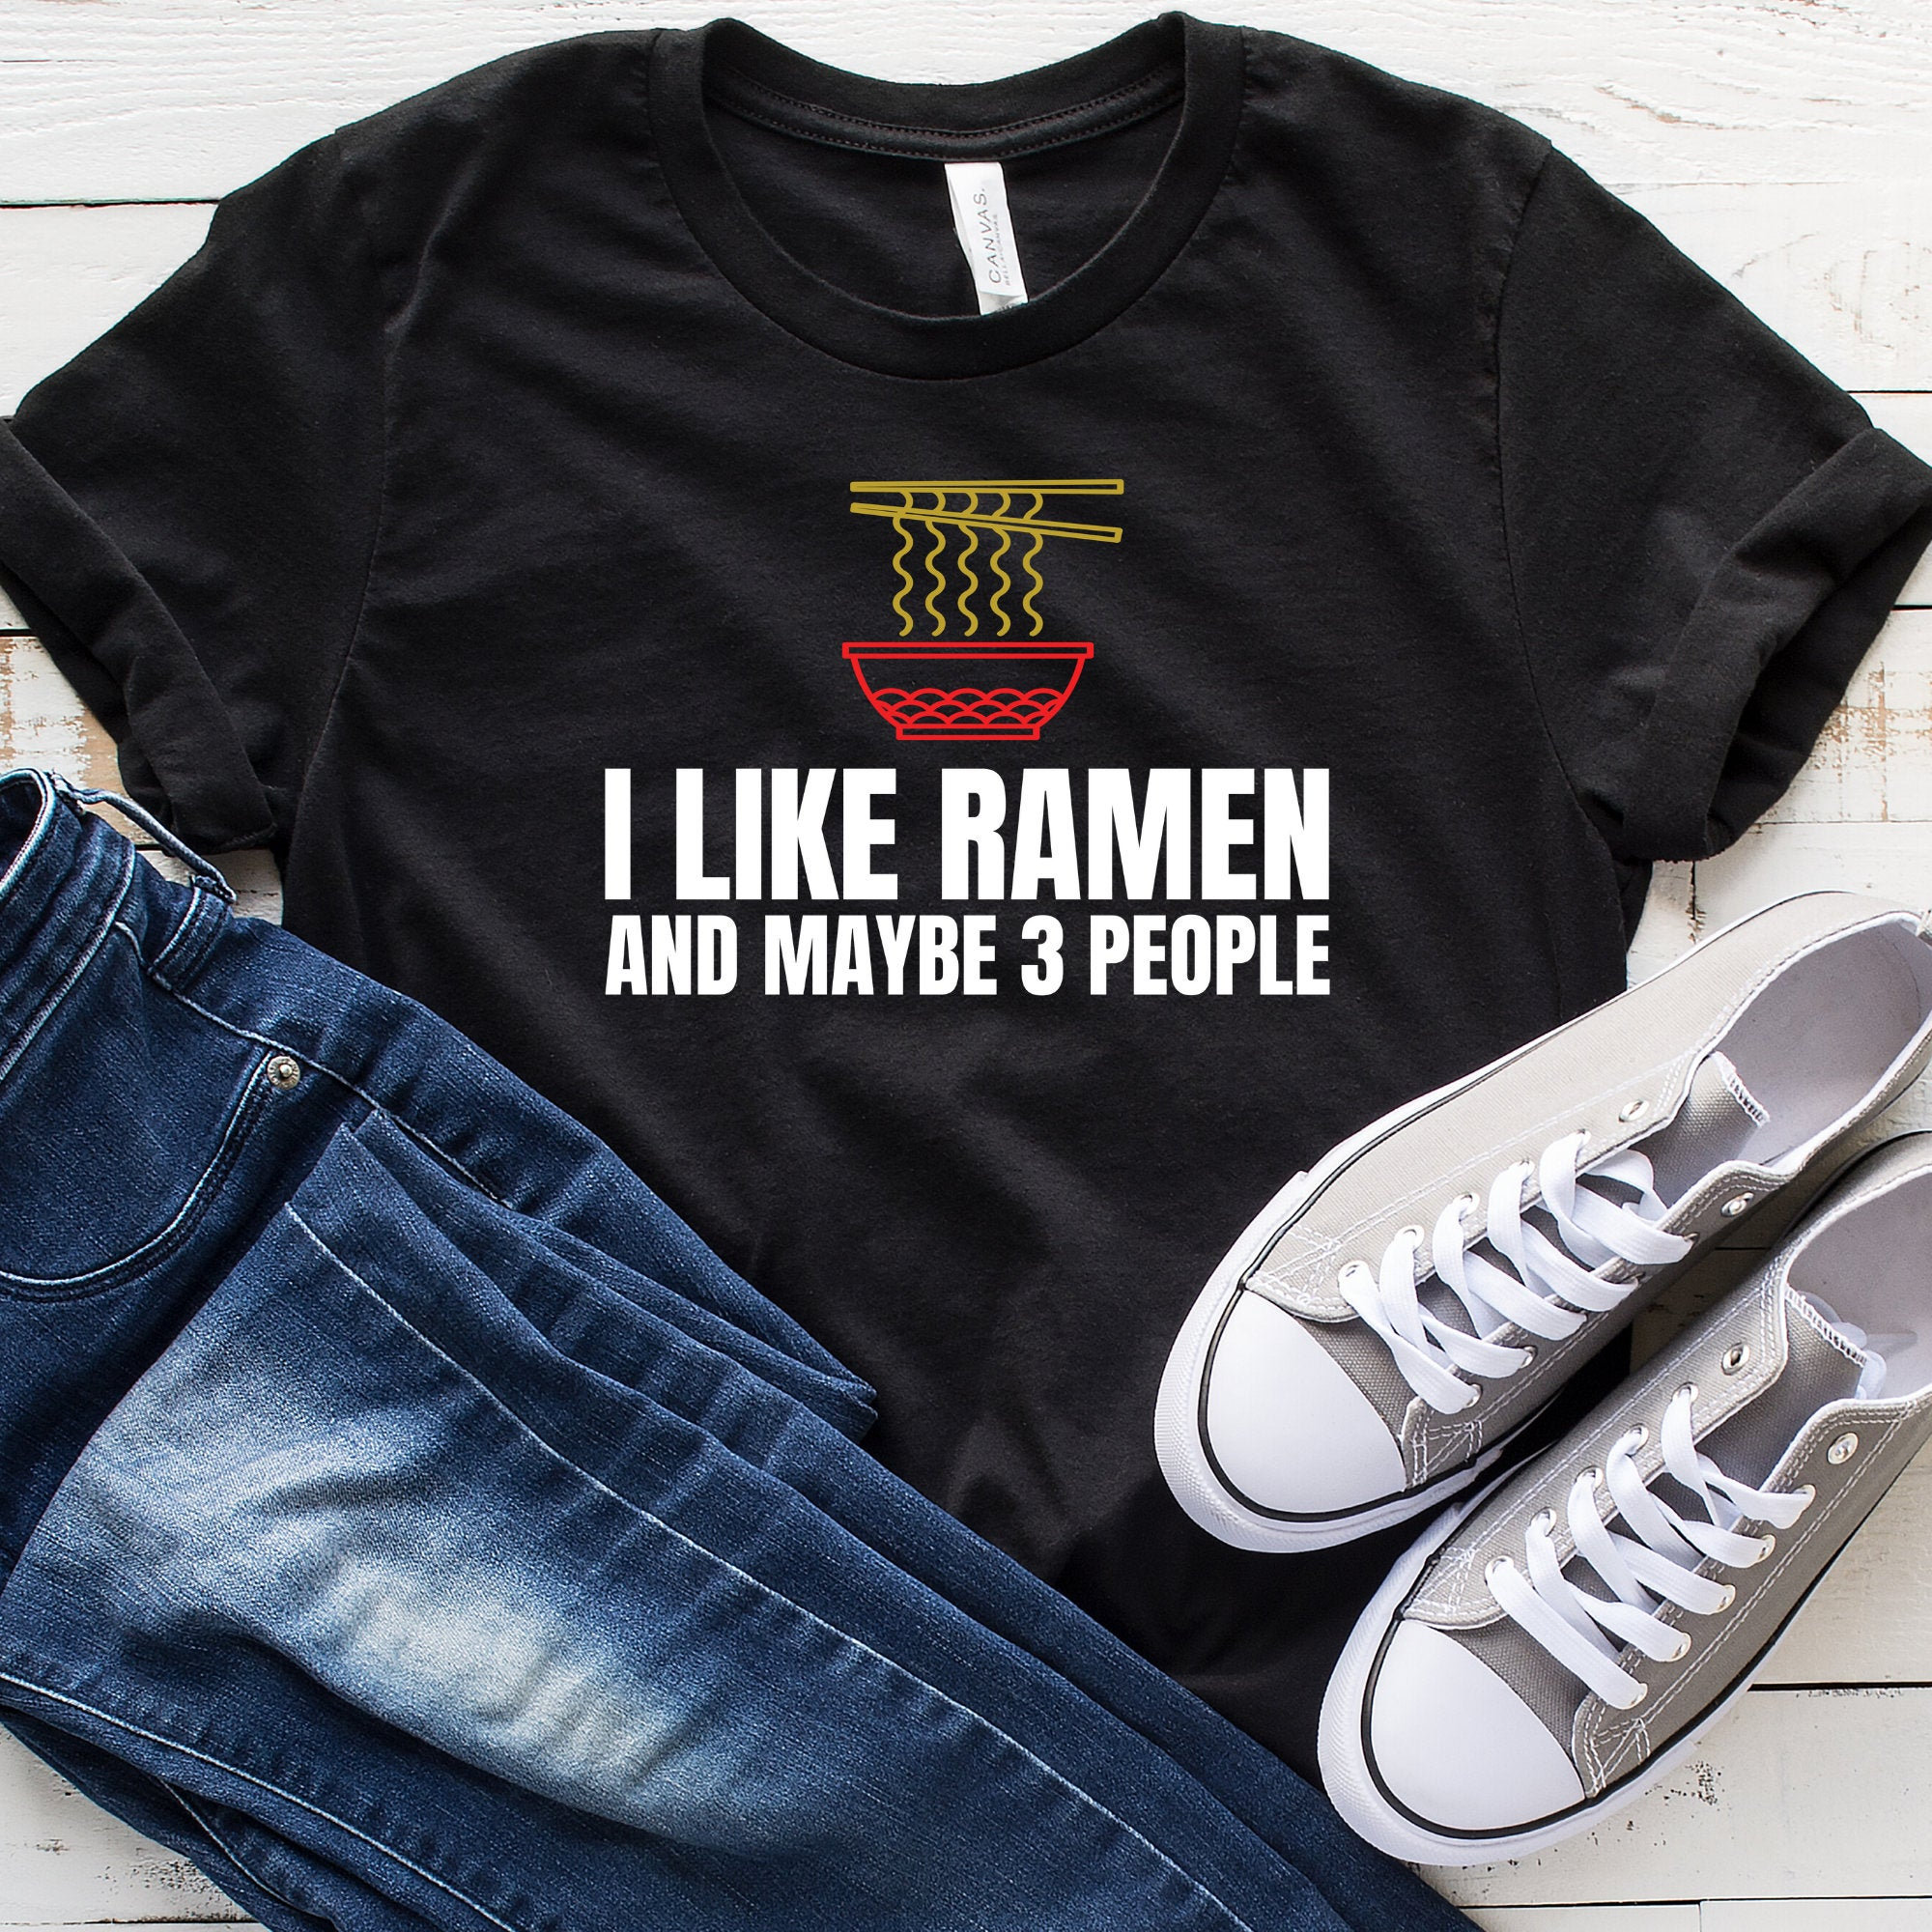 I Like Ramen & Maybe 3 People T-Shirt, Shirt, Noodles, Lover, Gift Funny Asian Food Shirt